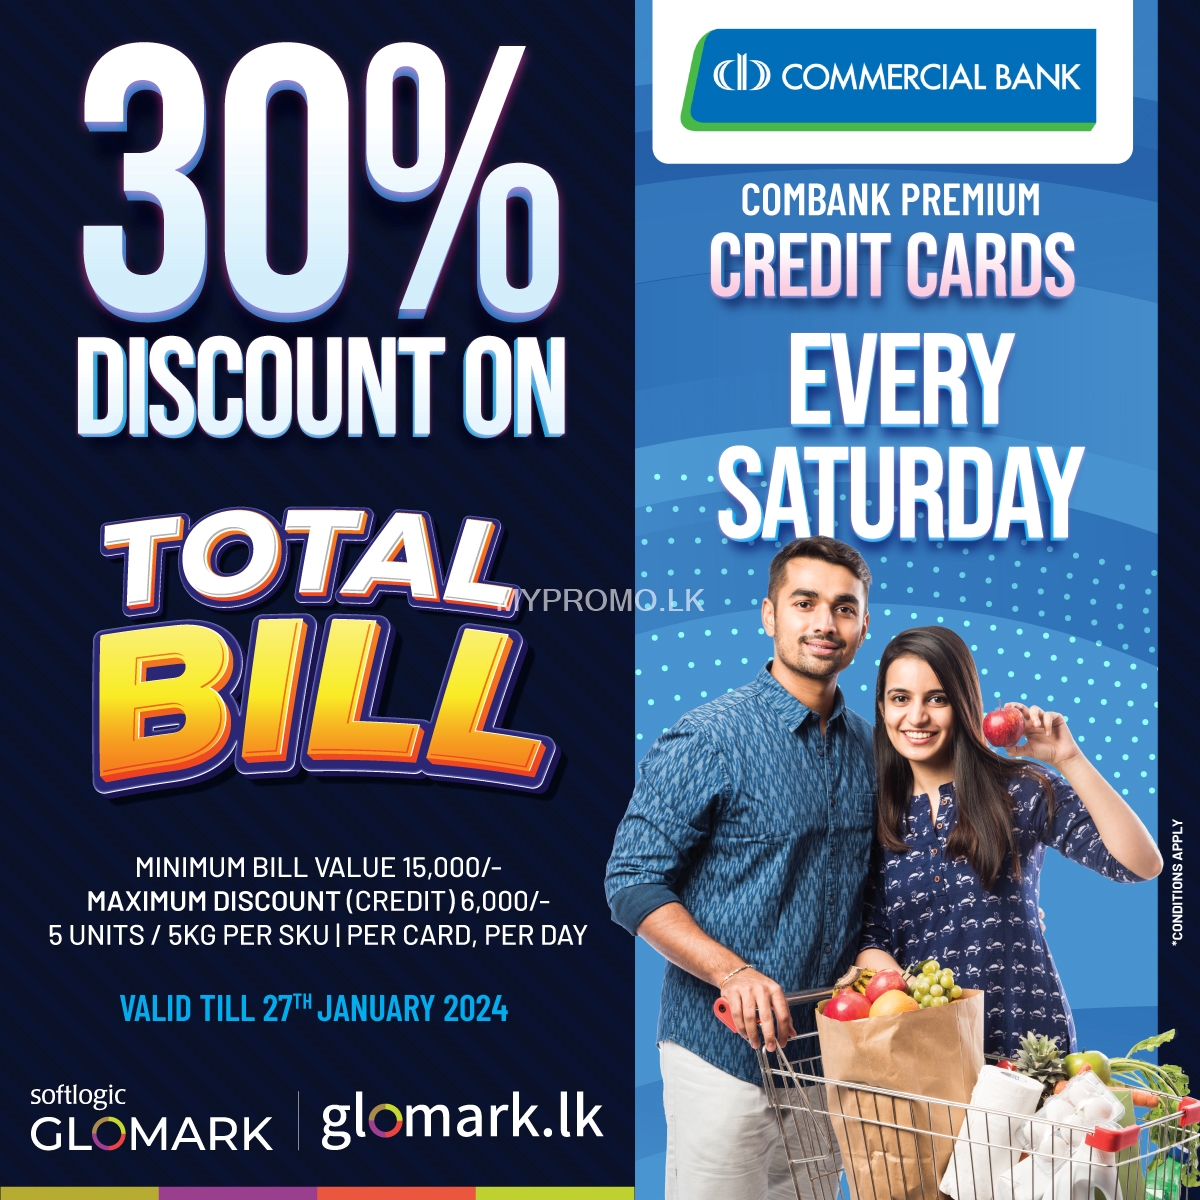 Enjoy 30% DISCOUNT on TOTAL BILL with ComBank Cards at Softlogic GLOMARK